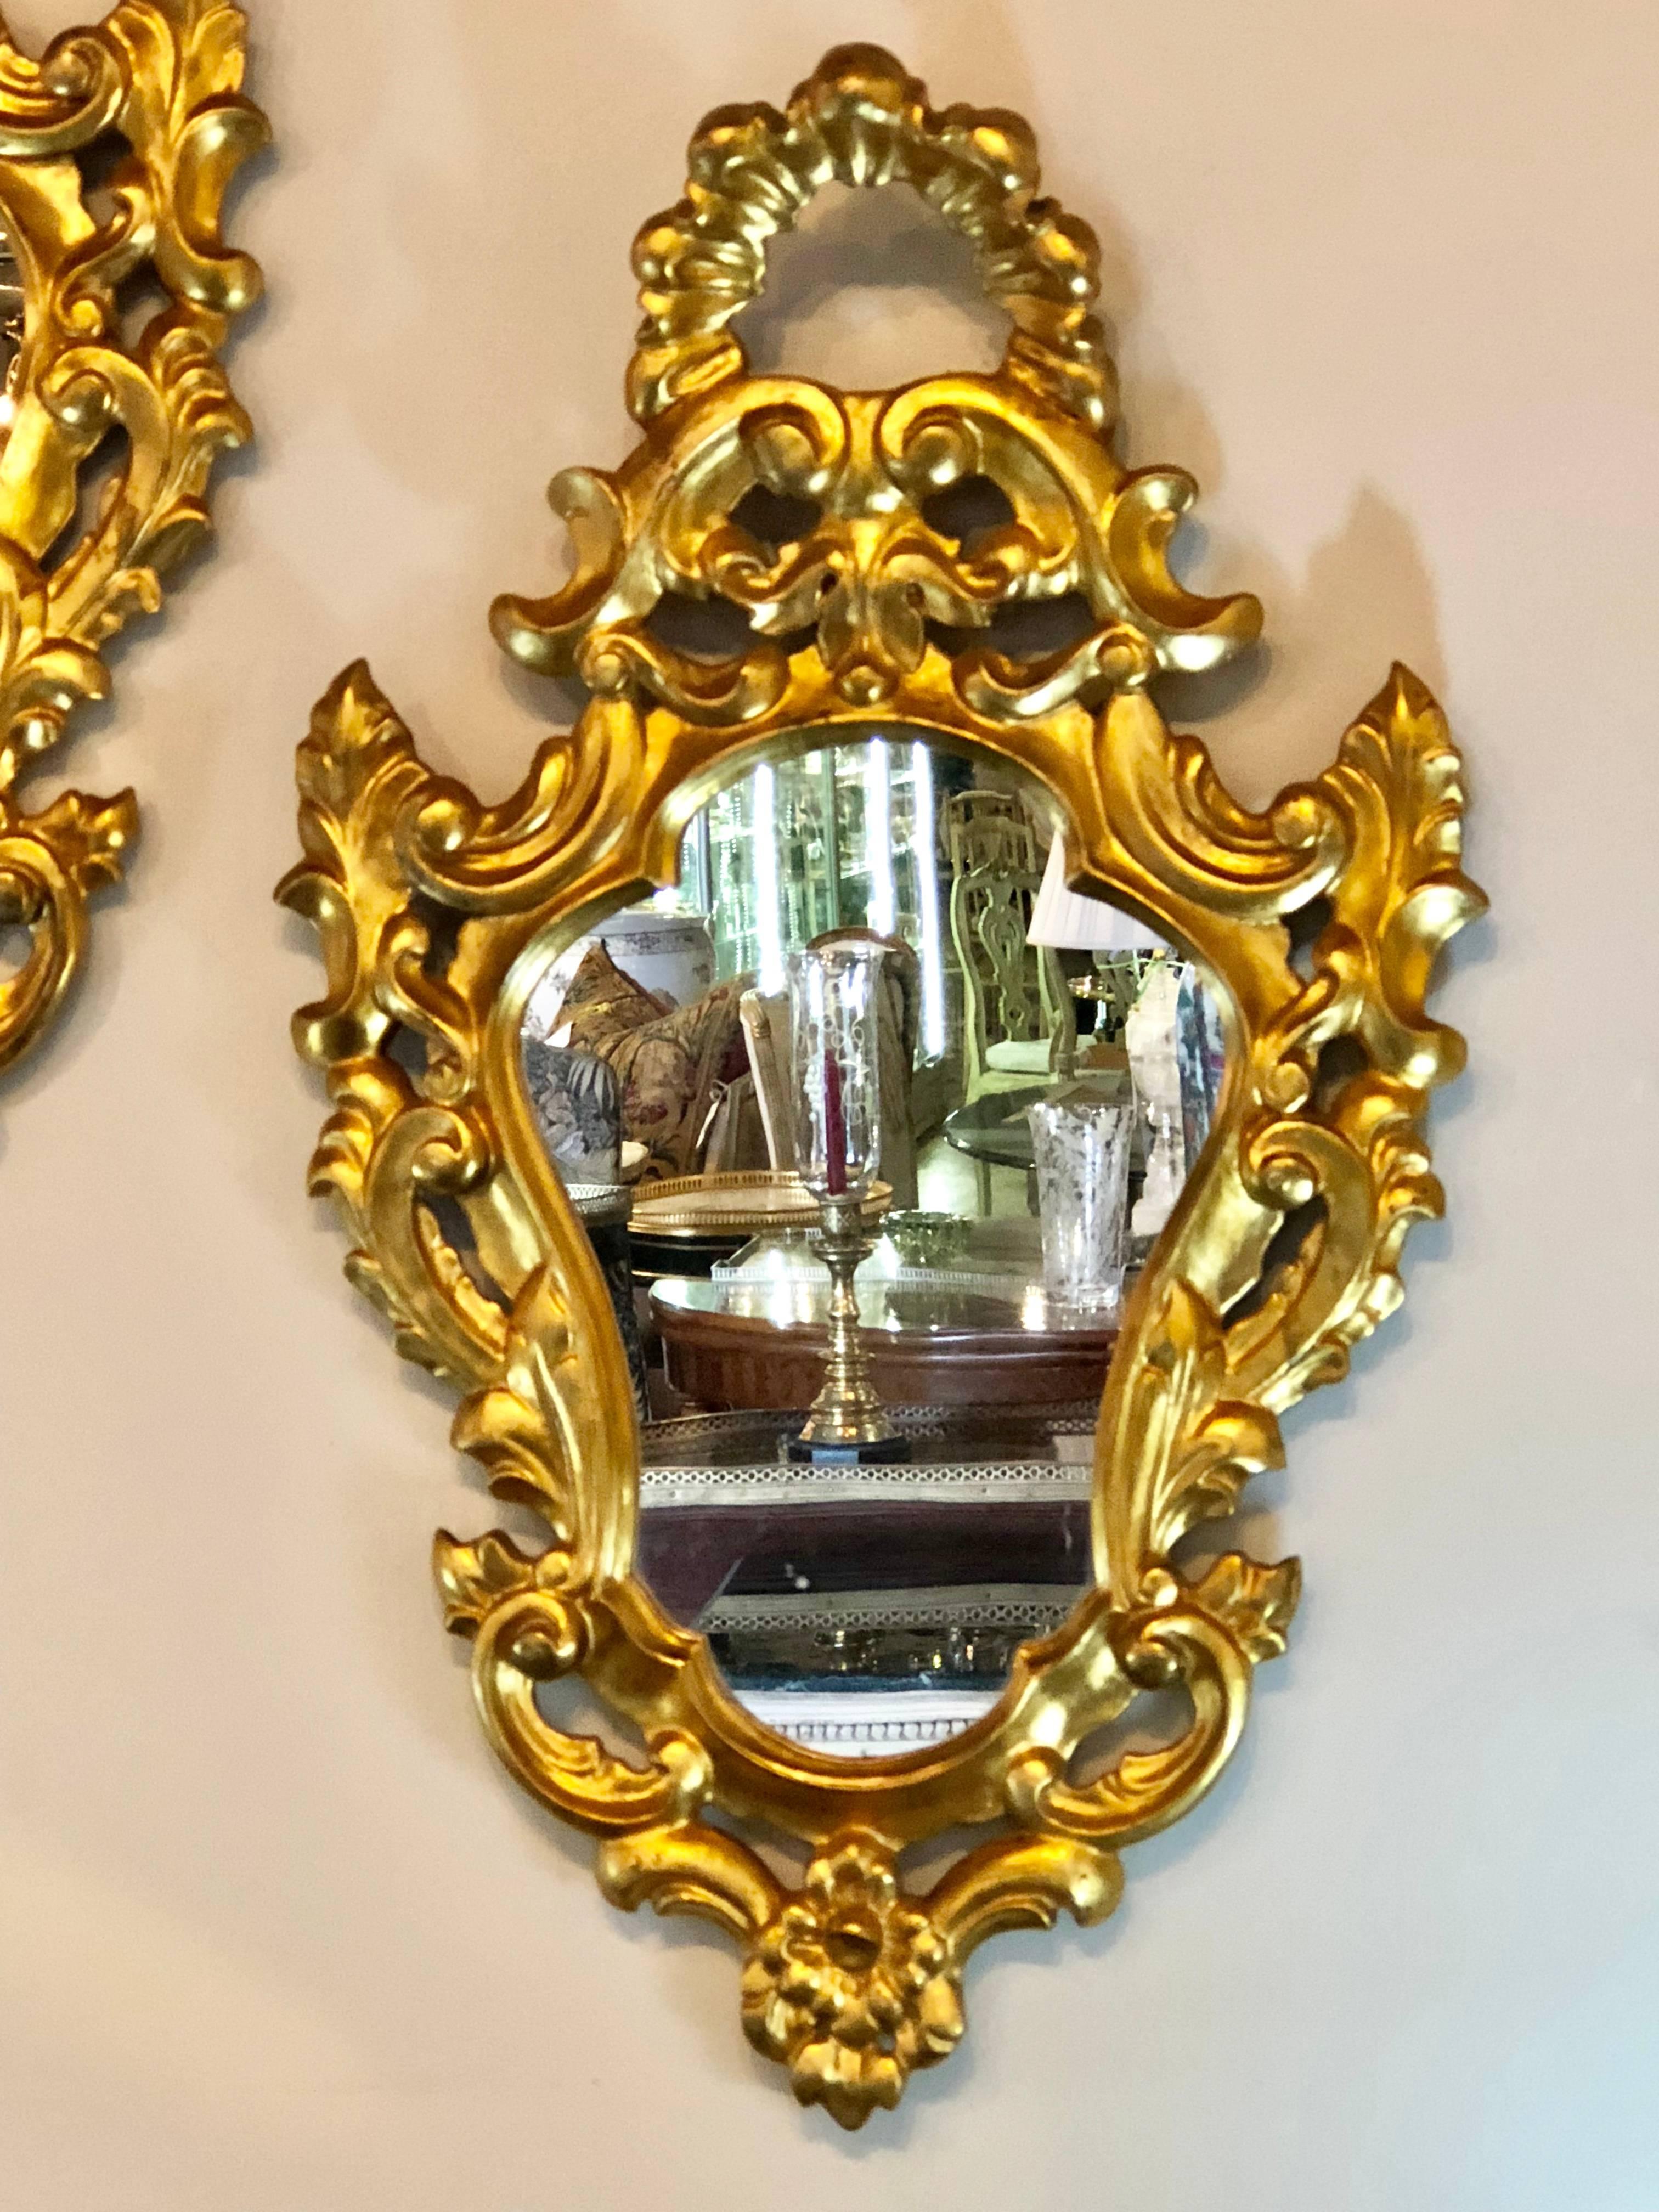 Pair of small giltwood Italian Rococo style wall mirrors. Each frame with wonderfully carved roses and scrool designs. From a fine NYC apartment.